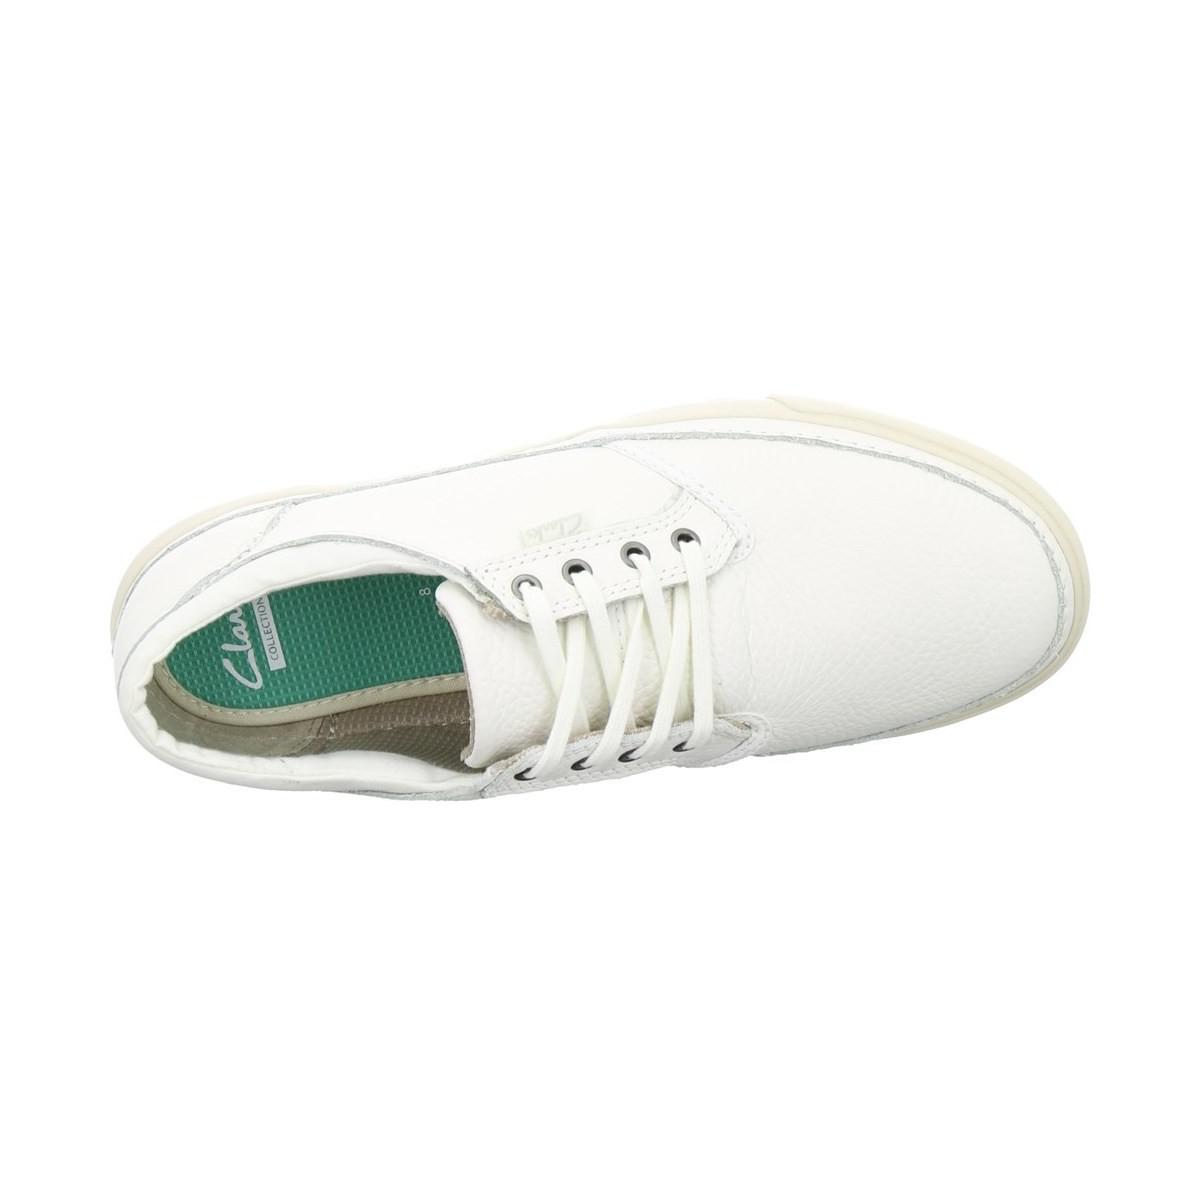 clarks torbay craft white sneakers